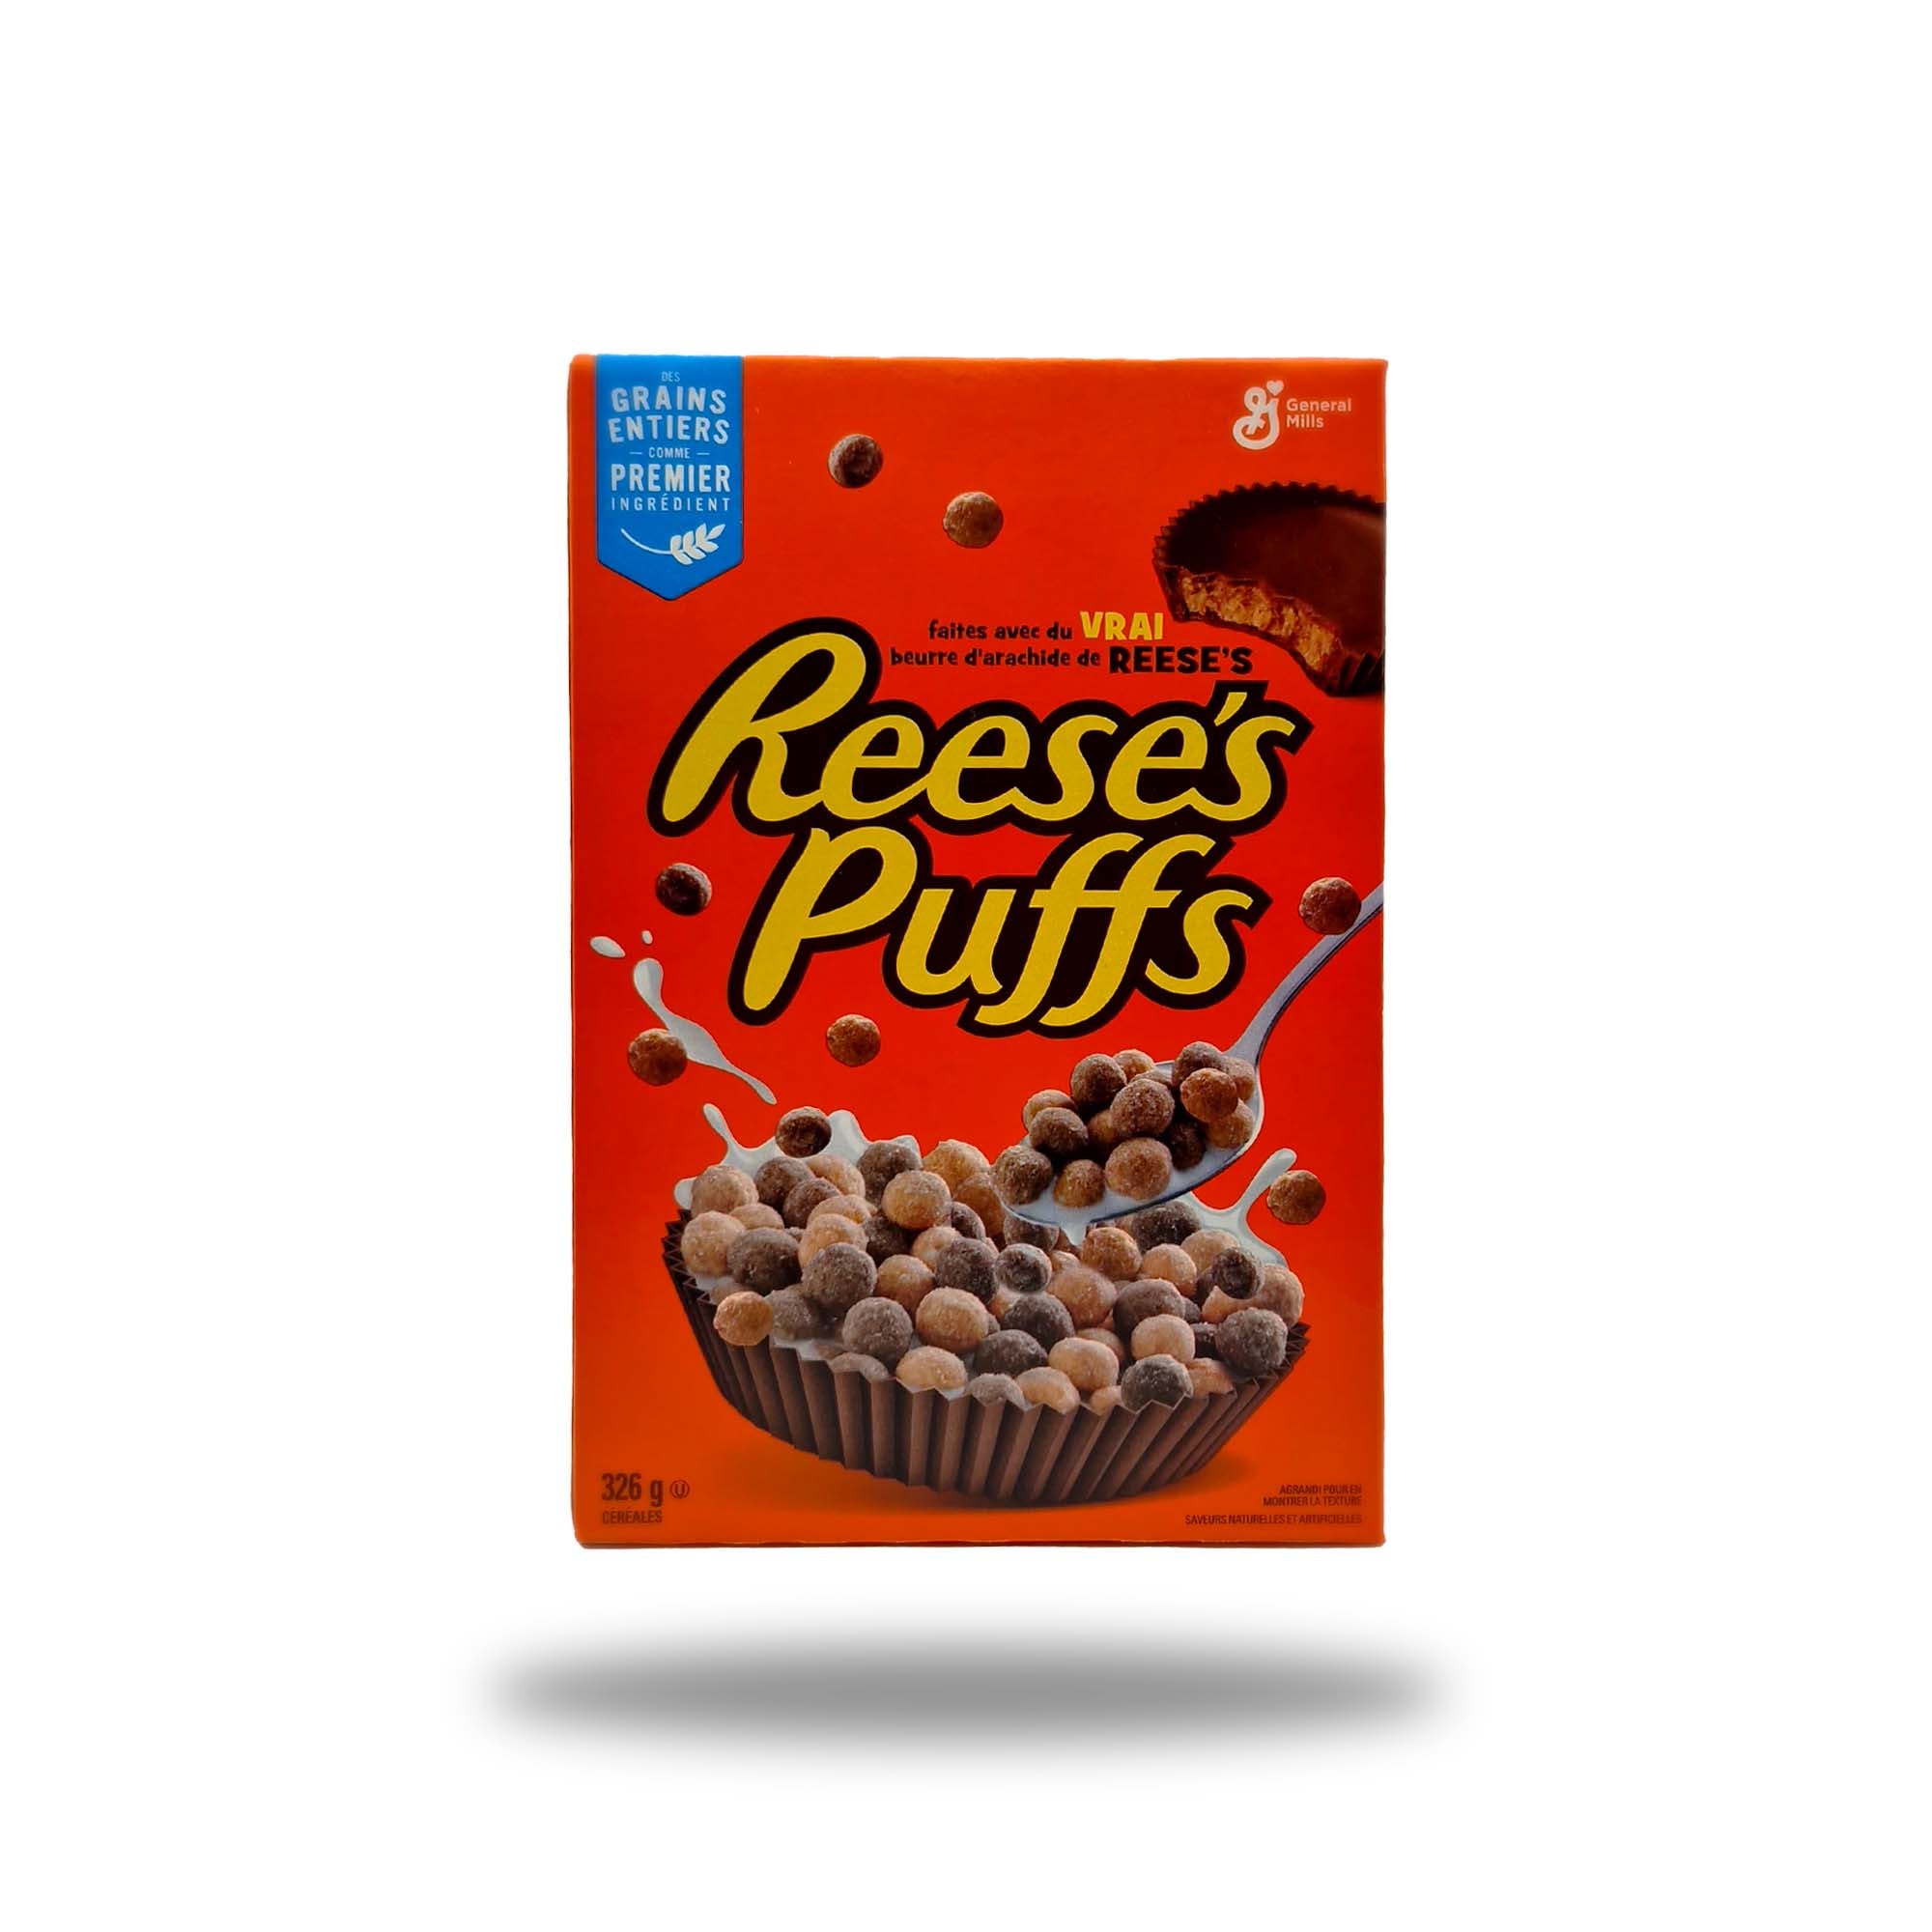 Reese's Puffs Cereals 326g 